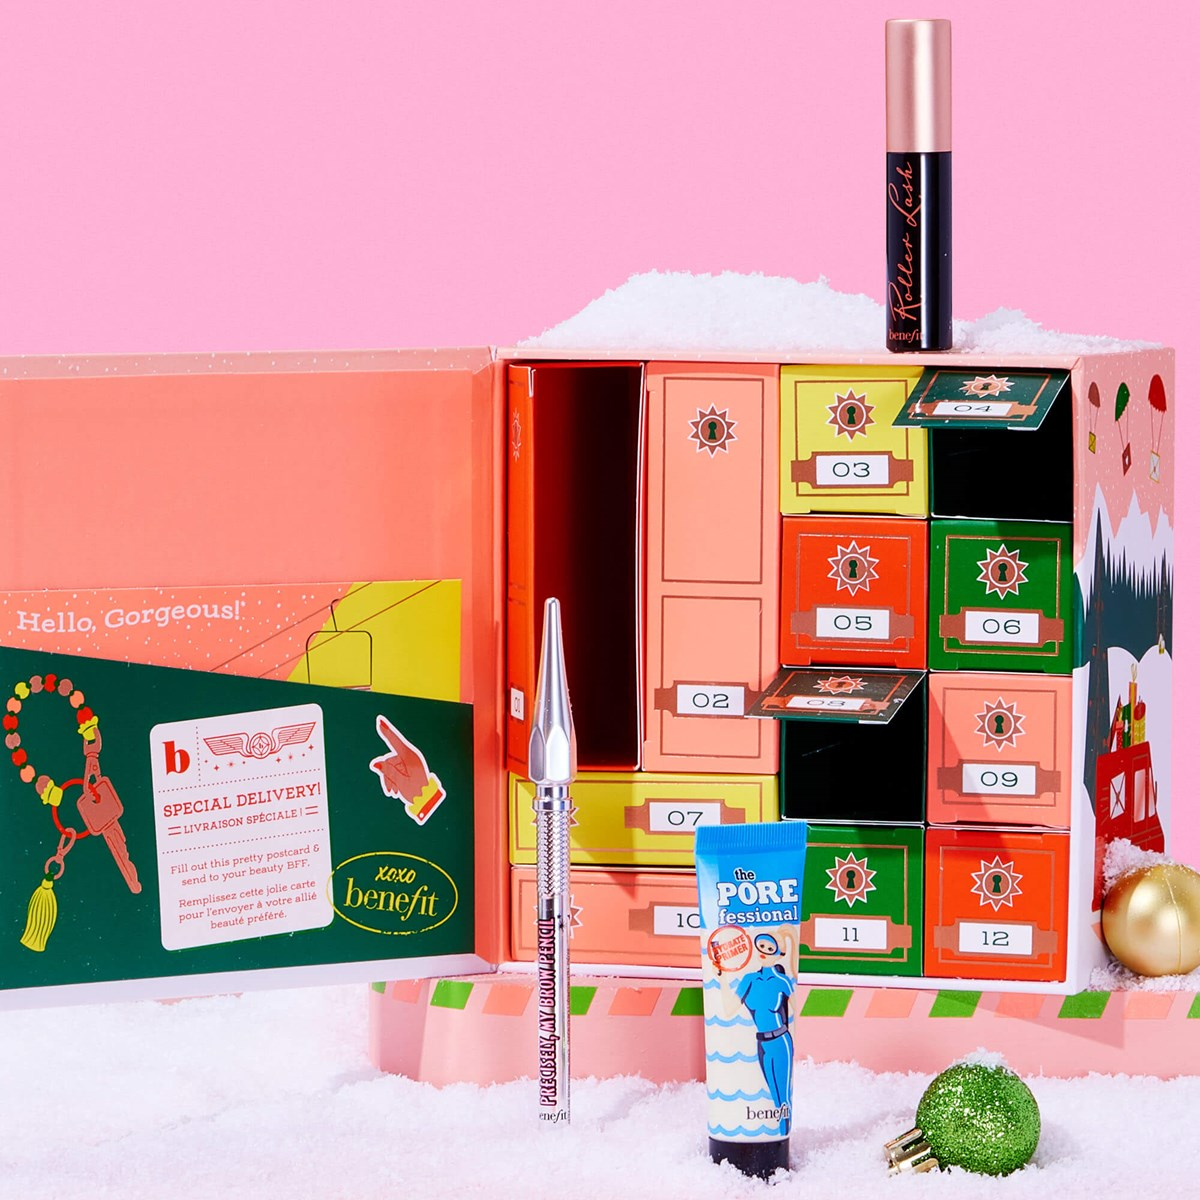 Benefit Cosmetics Advent Calendar Reviews: Get All The Details At Hello